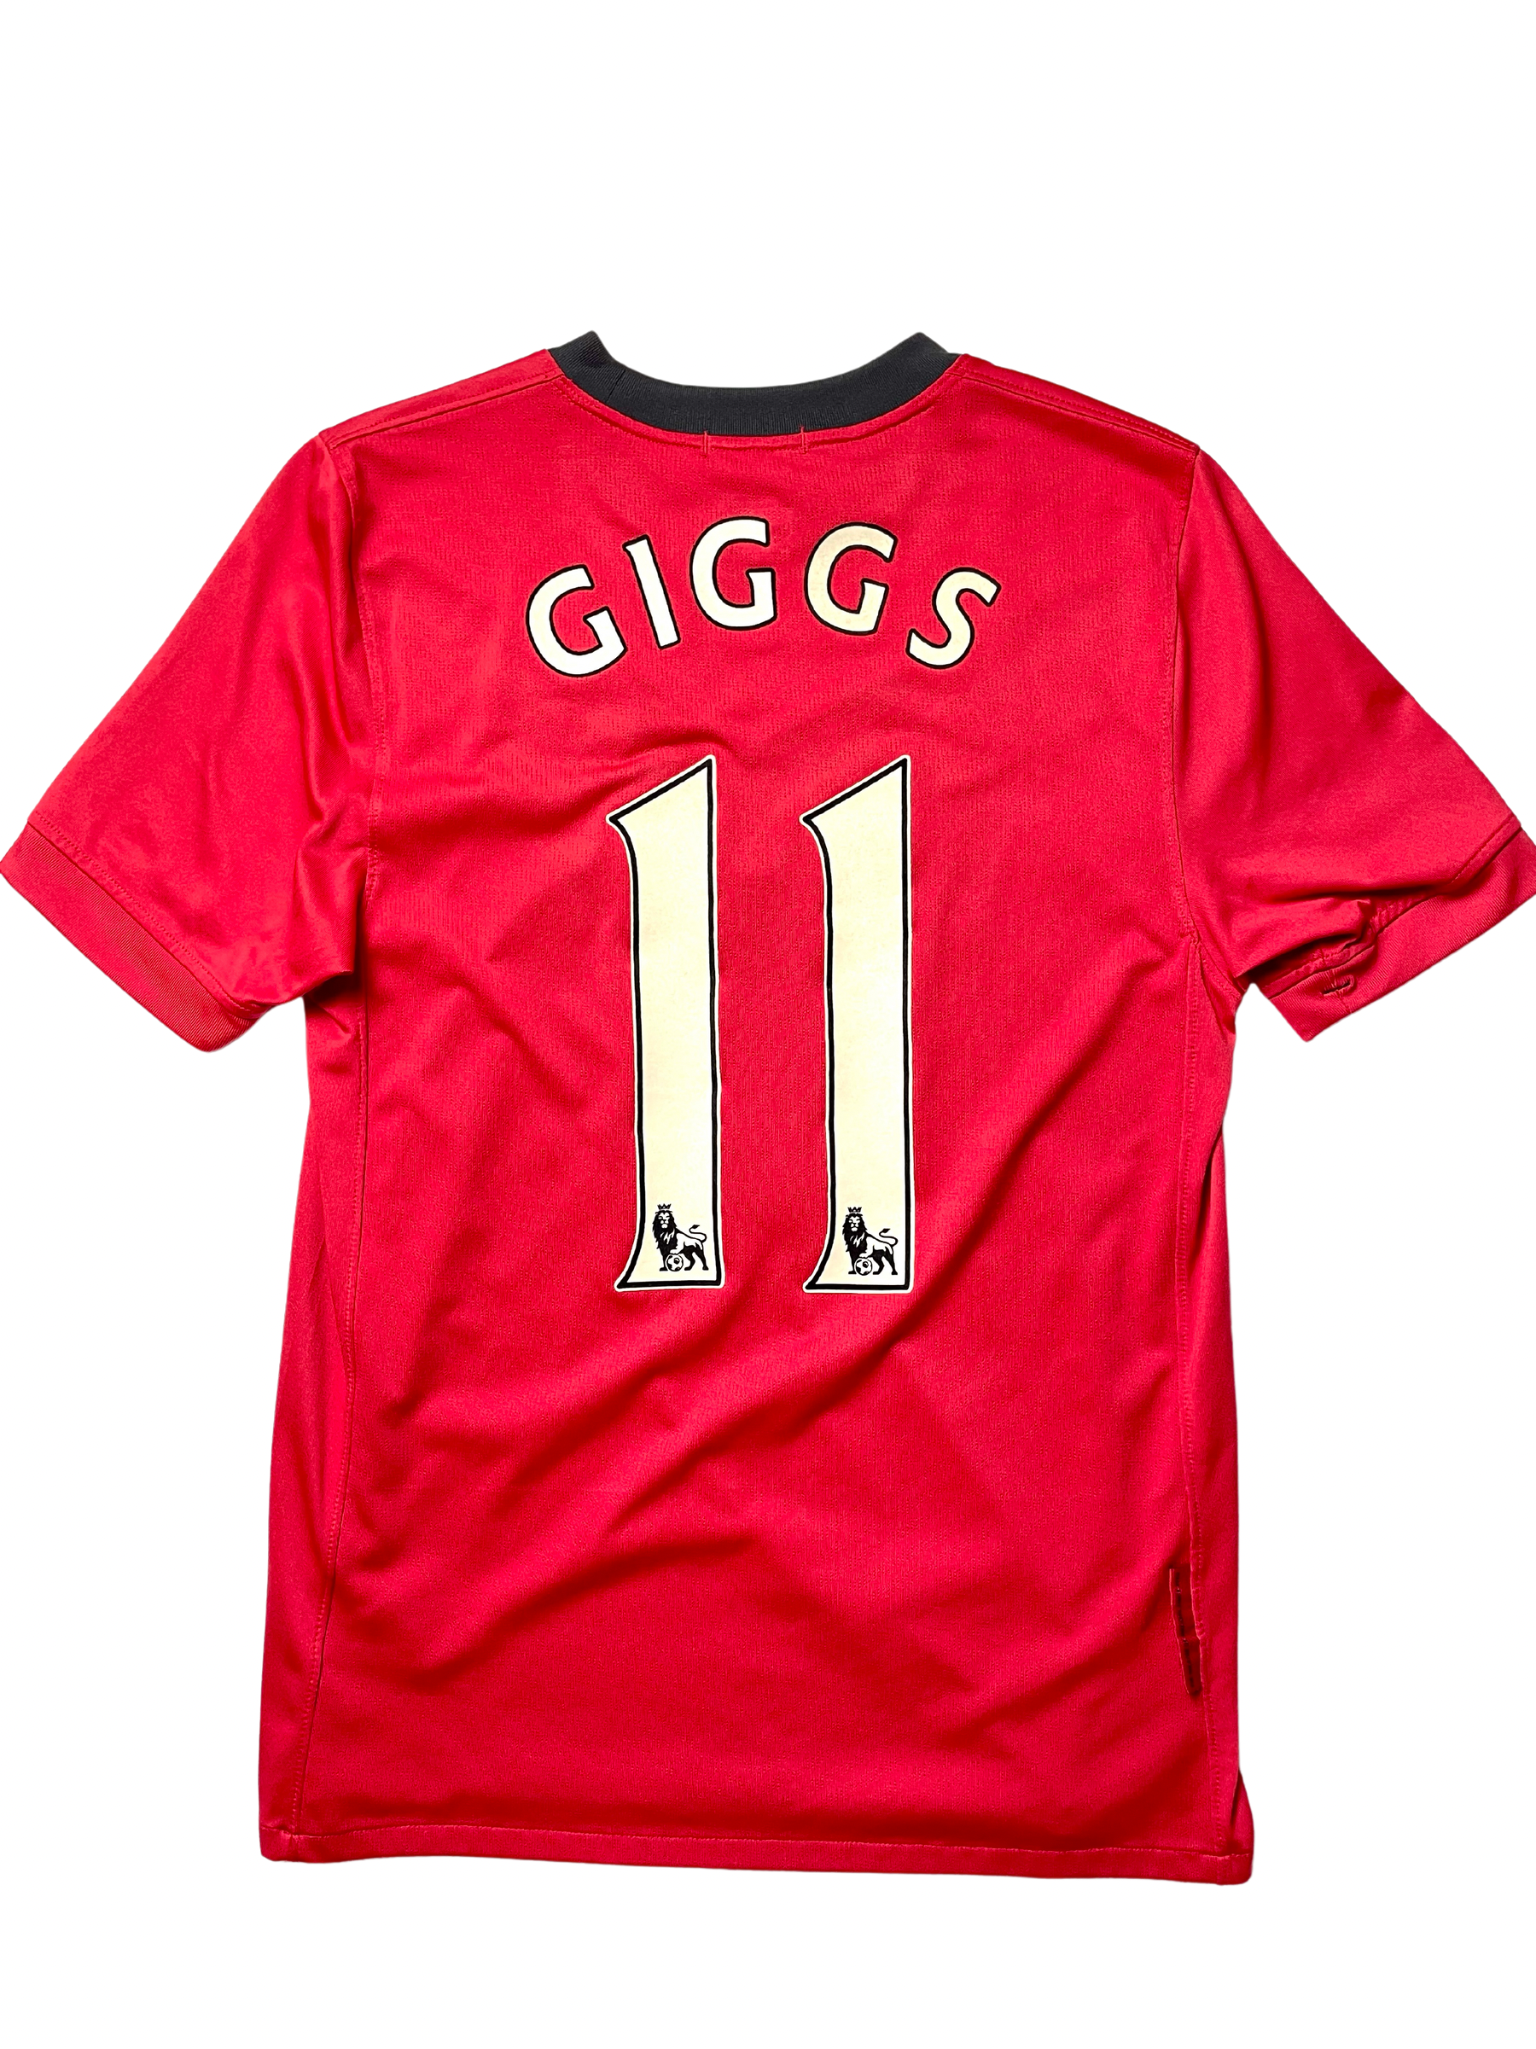 Manchester United Home #11 Giggs 2009-2010 S - Unwanted FC